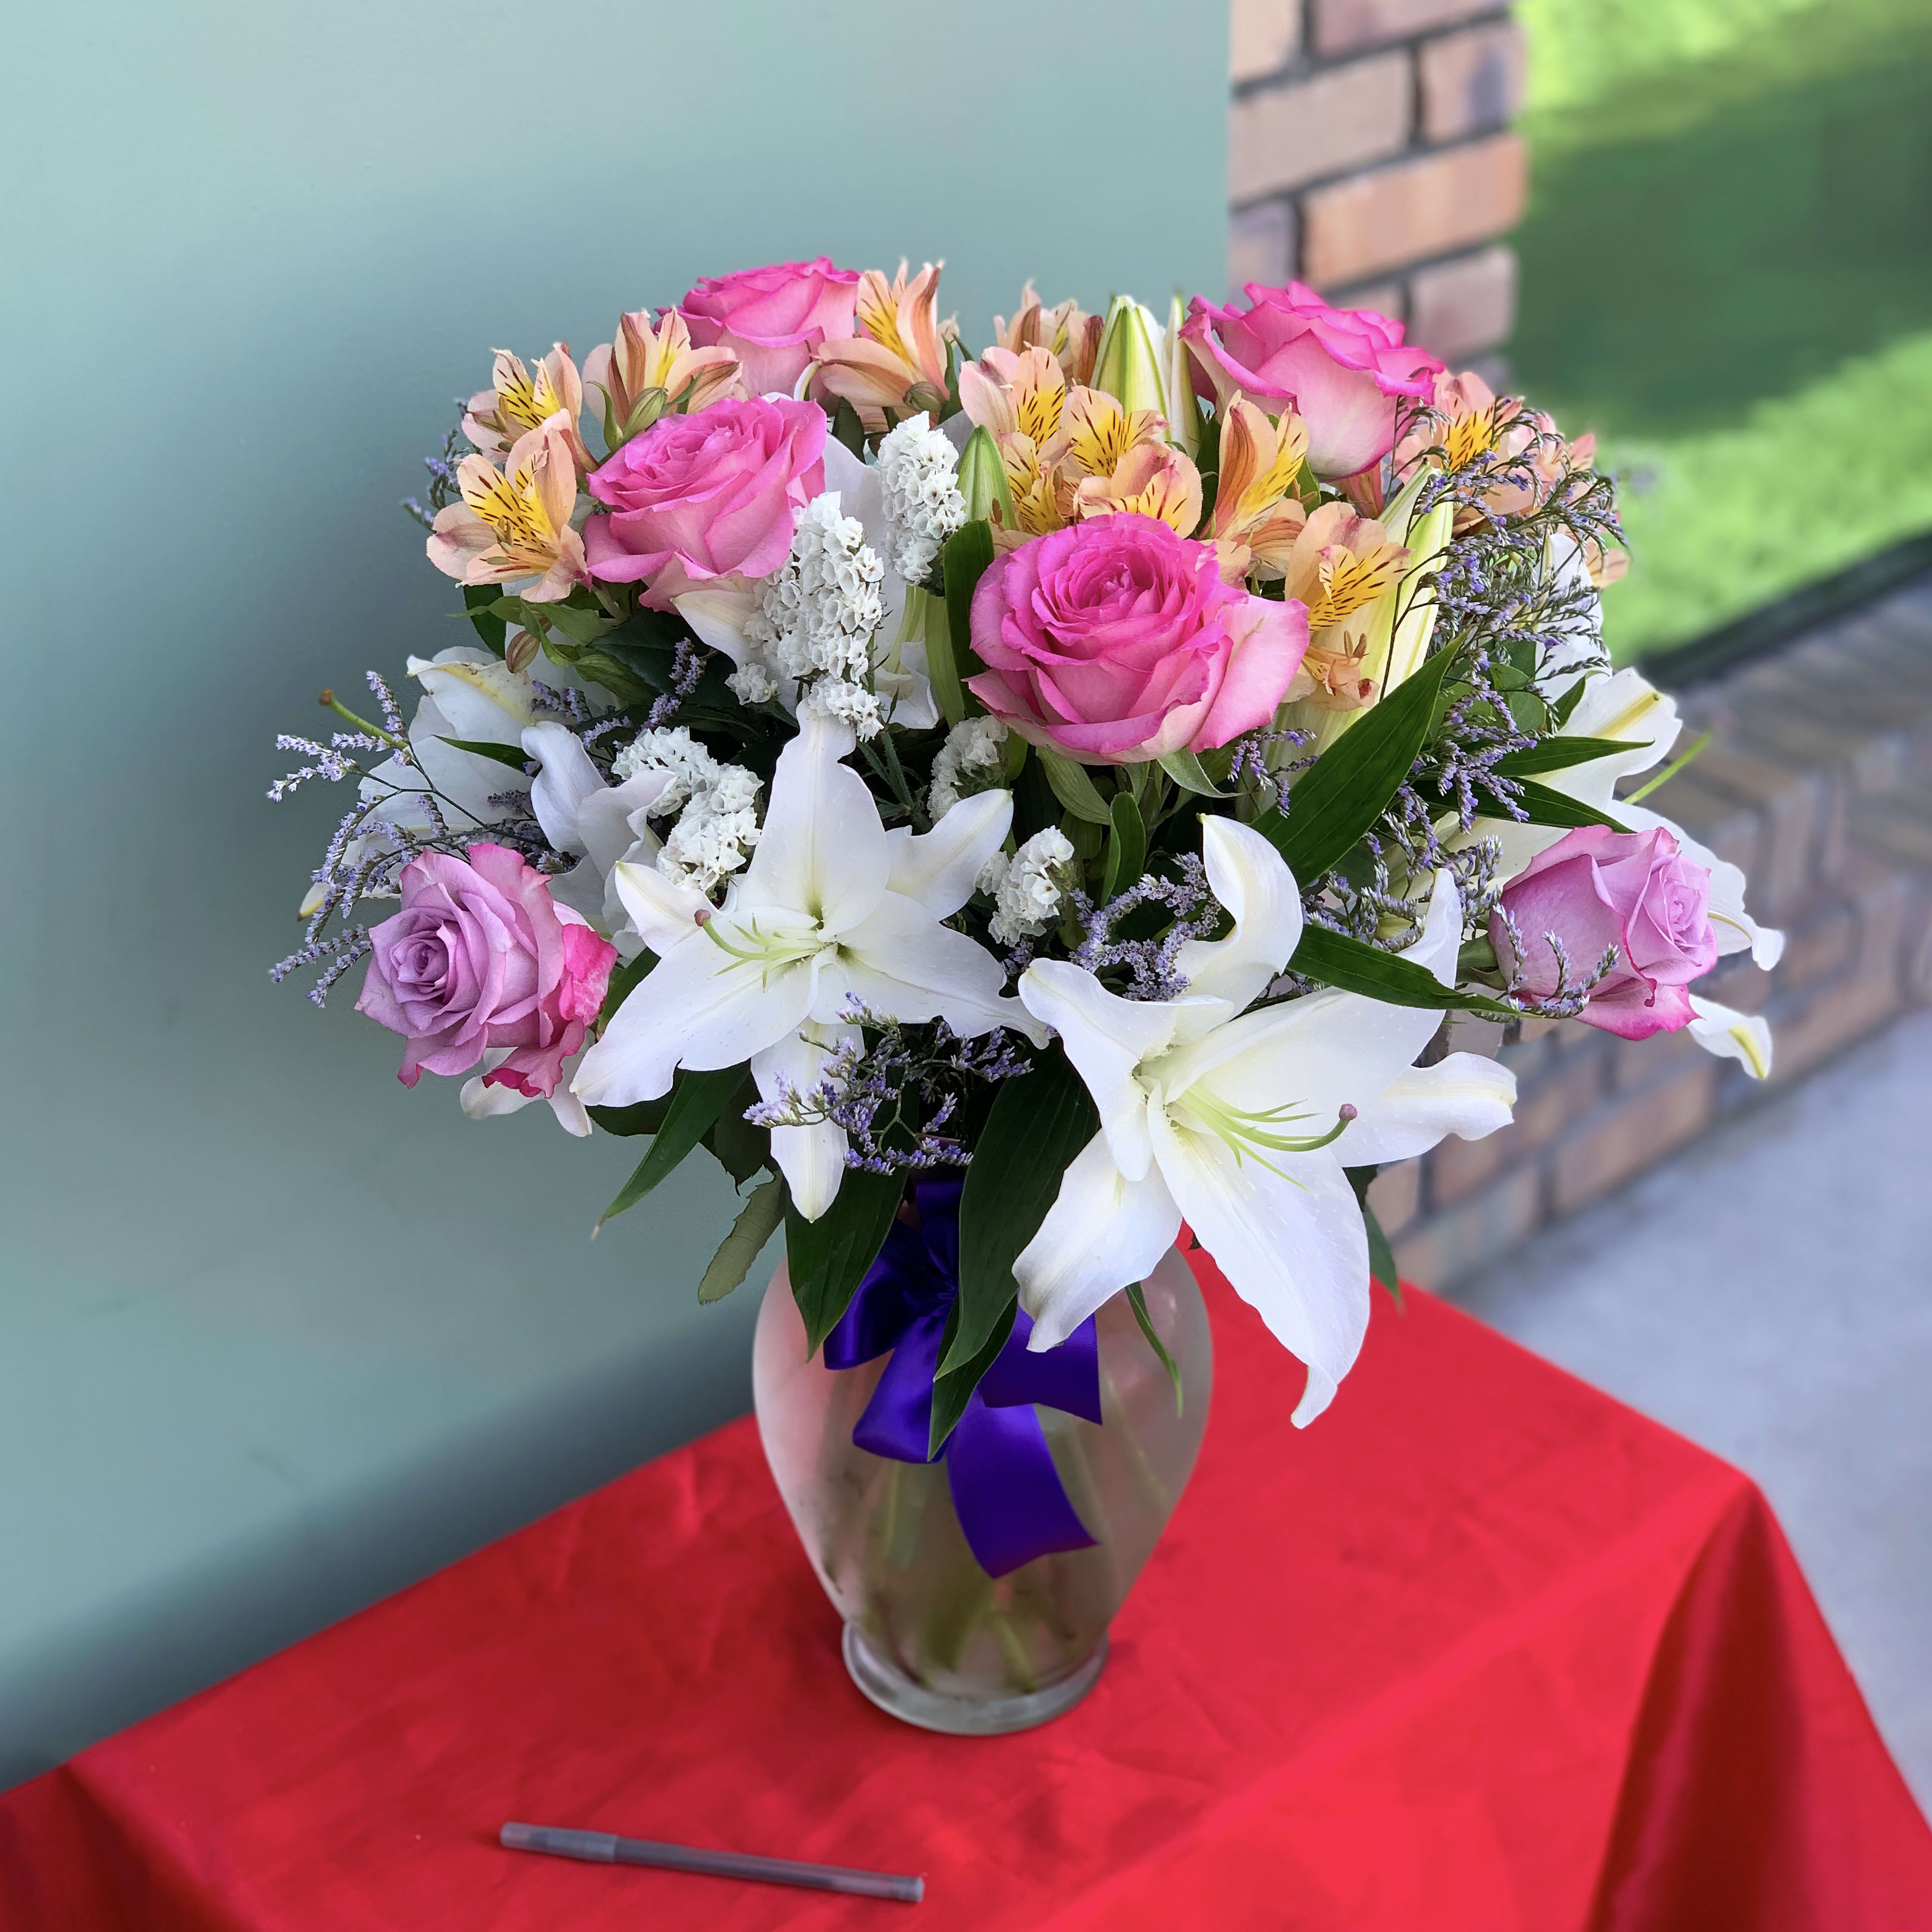 Dance With Me - Come dance with this beautiful arrangement full of roses and lilies